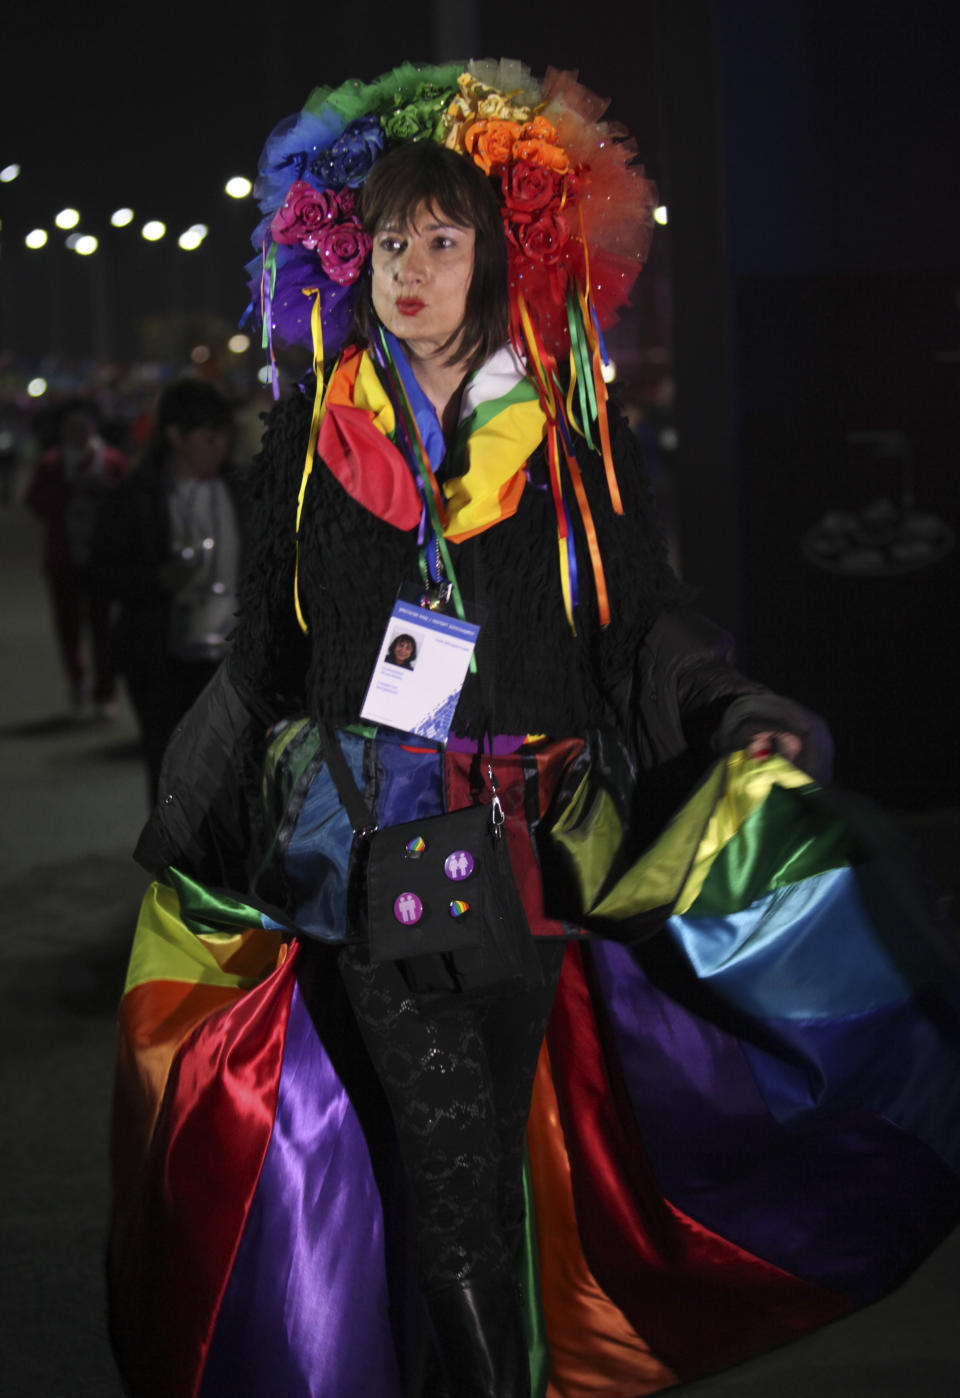 Vladimir Luxuria, a former Communist lawmaker in the Italian parliament and prominent crusader for transgender rights, walks in Olympic Park at the 2014 Winter Olympics, Monday, Feb. 17, 2014, in Sochi, Russia. Luxuria said she was detained by police at the Olympics after being stopped while carrying a rainbow flag that read in Russian: "Gay is OK." Police on Monday denied this happened. (AP Photo/Steve Barker)